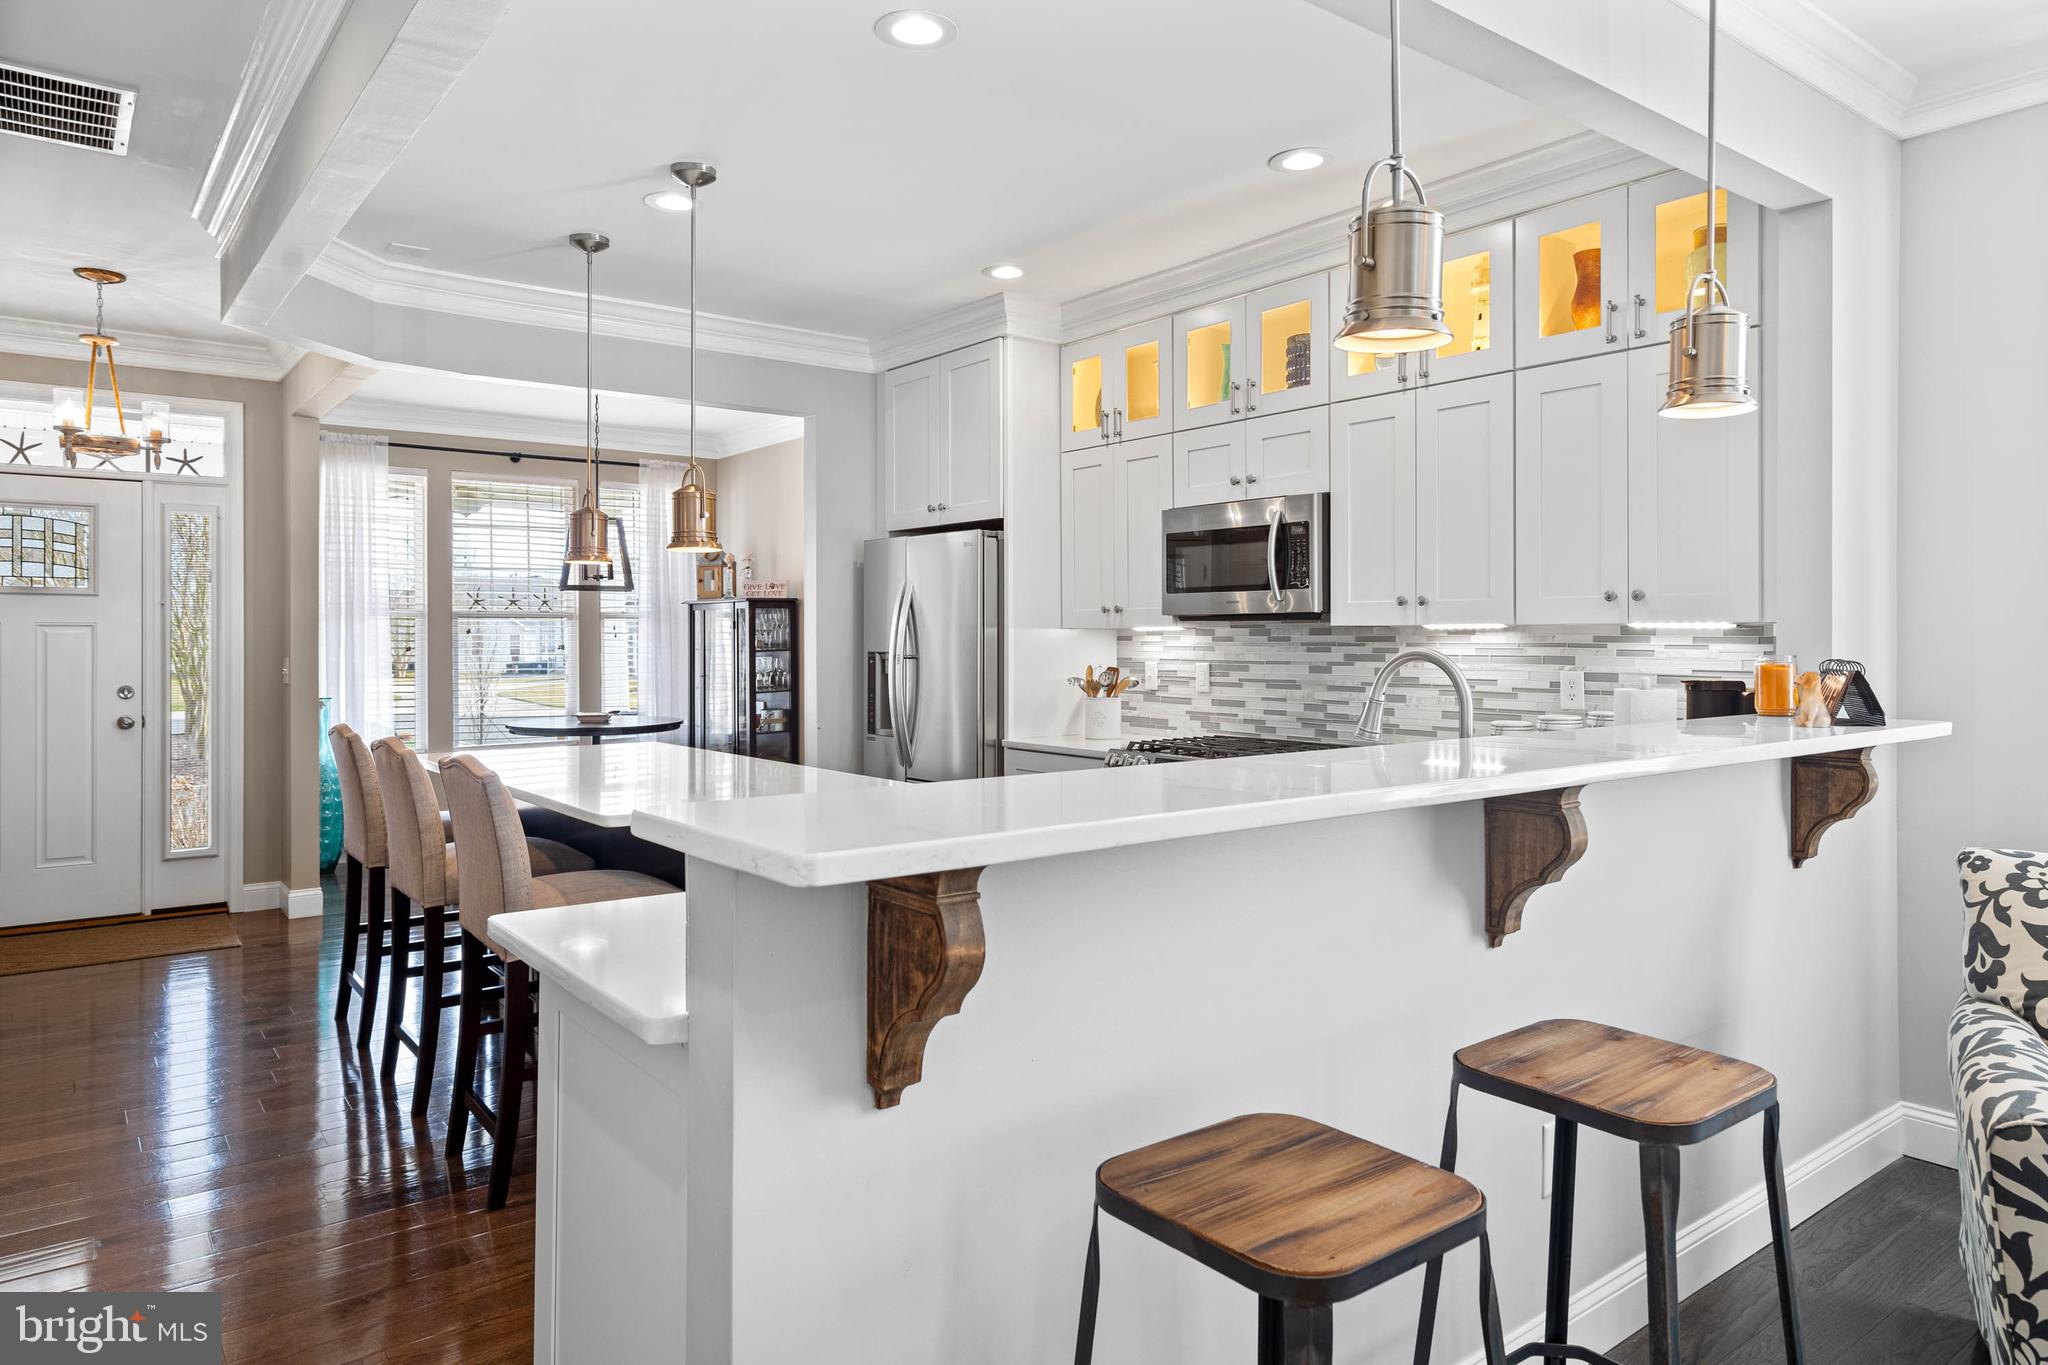 a kitchen with stainless steel appliances kitchen island granite countertop a table chairs in it and wooden floors